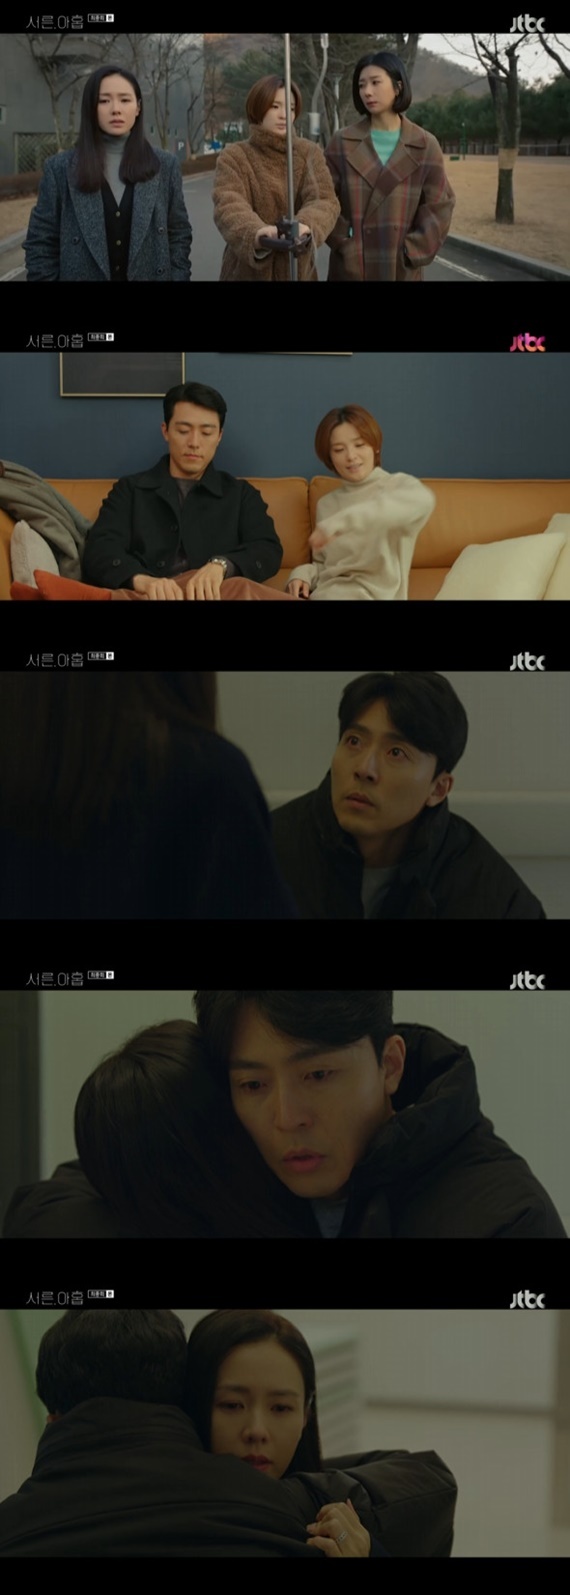 Seoul = = Thirty, nine This is life reveals fear at the appearance of Jeun Mi-do, whose condition worsens.At the final episode of JTBCs tree drama Thirty, Nine (playplayed by Yoo Young-ah/director Kim Sang-ho), which was broadcast at 10:30 p.m. on the 31st, it included the appearance of Jeong Chan-young (Jeun Mi-do), who was hospitalized due to worsening illness.Chung Chan-young refused to go to the hospital, saying, The doctor recommended the hospital but wanted to send it to Cha Mi-jo (Son Ye-jin) at home.In the end, Chung Chan-young was discharged, and her mother Kim Kyung-ae (Lee Ji-hyun), who returned home together, looked at Kim Jin-suk (This is life) and her happy daughter Chung Chan-young.Kim Kyung-ae told Kim Jin-suk that he would go back to Yangpyeong, saying, I think its easy to have two.Kim Jin-suk, who can not report his marriage, said, What do you care, you two are so good.However, Kim Jin-suk hugged Cha Mi-jo one day in the state of Jung Chan-young, who was going back and forth, and said, Chan Young is strange, today is strange, what should I do?Chamijo comforted Chung Chan-young, saying, I do not go yet, I can not.On the other hand, JTBC Tree Drama Thirty, Nine is a real human romance drama that deals with the friendship, love and deep story of three friends who are about forty.